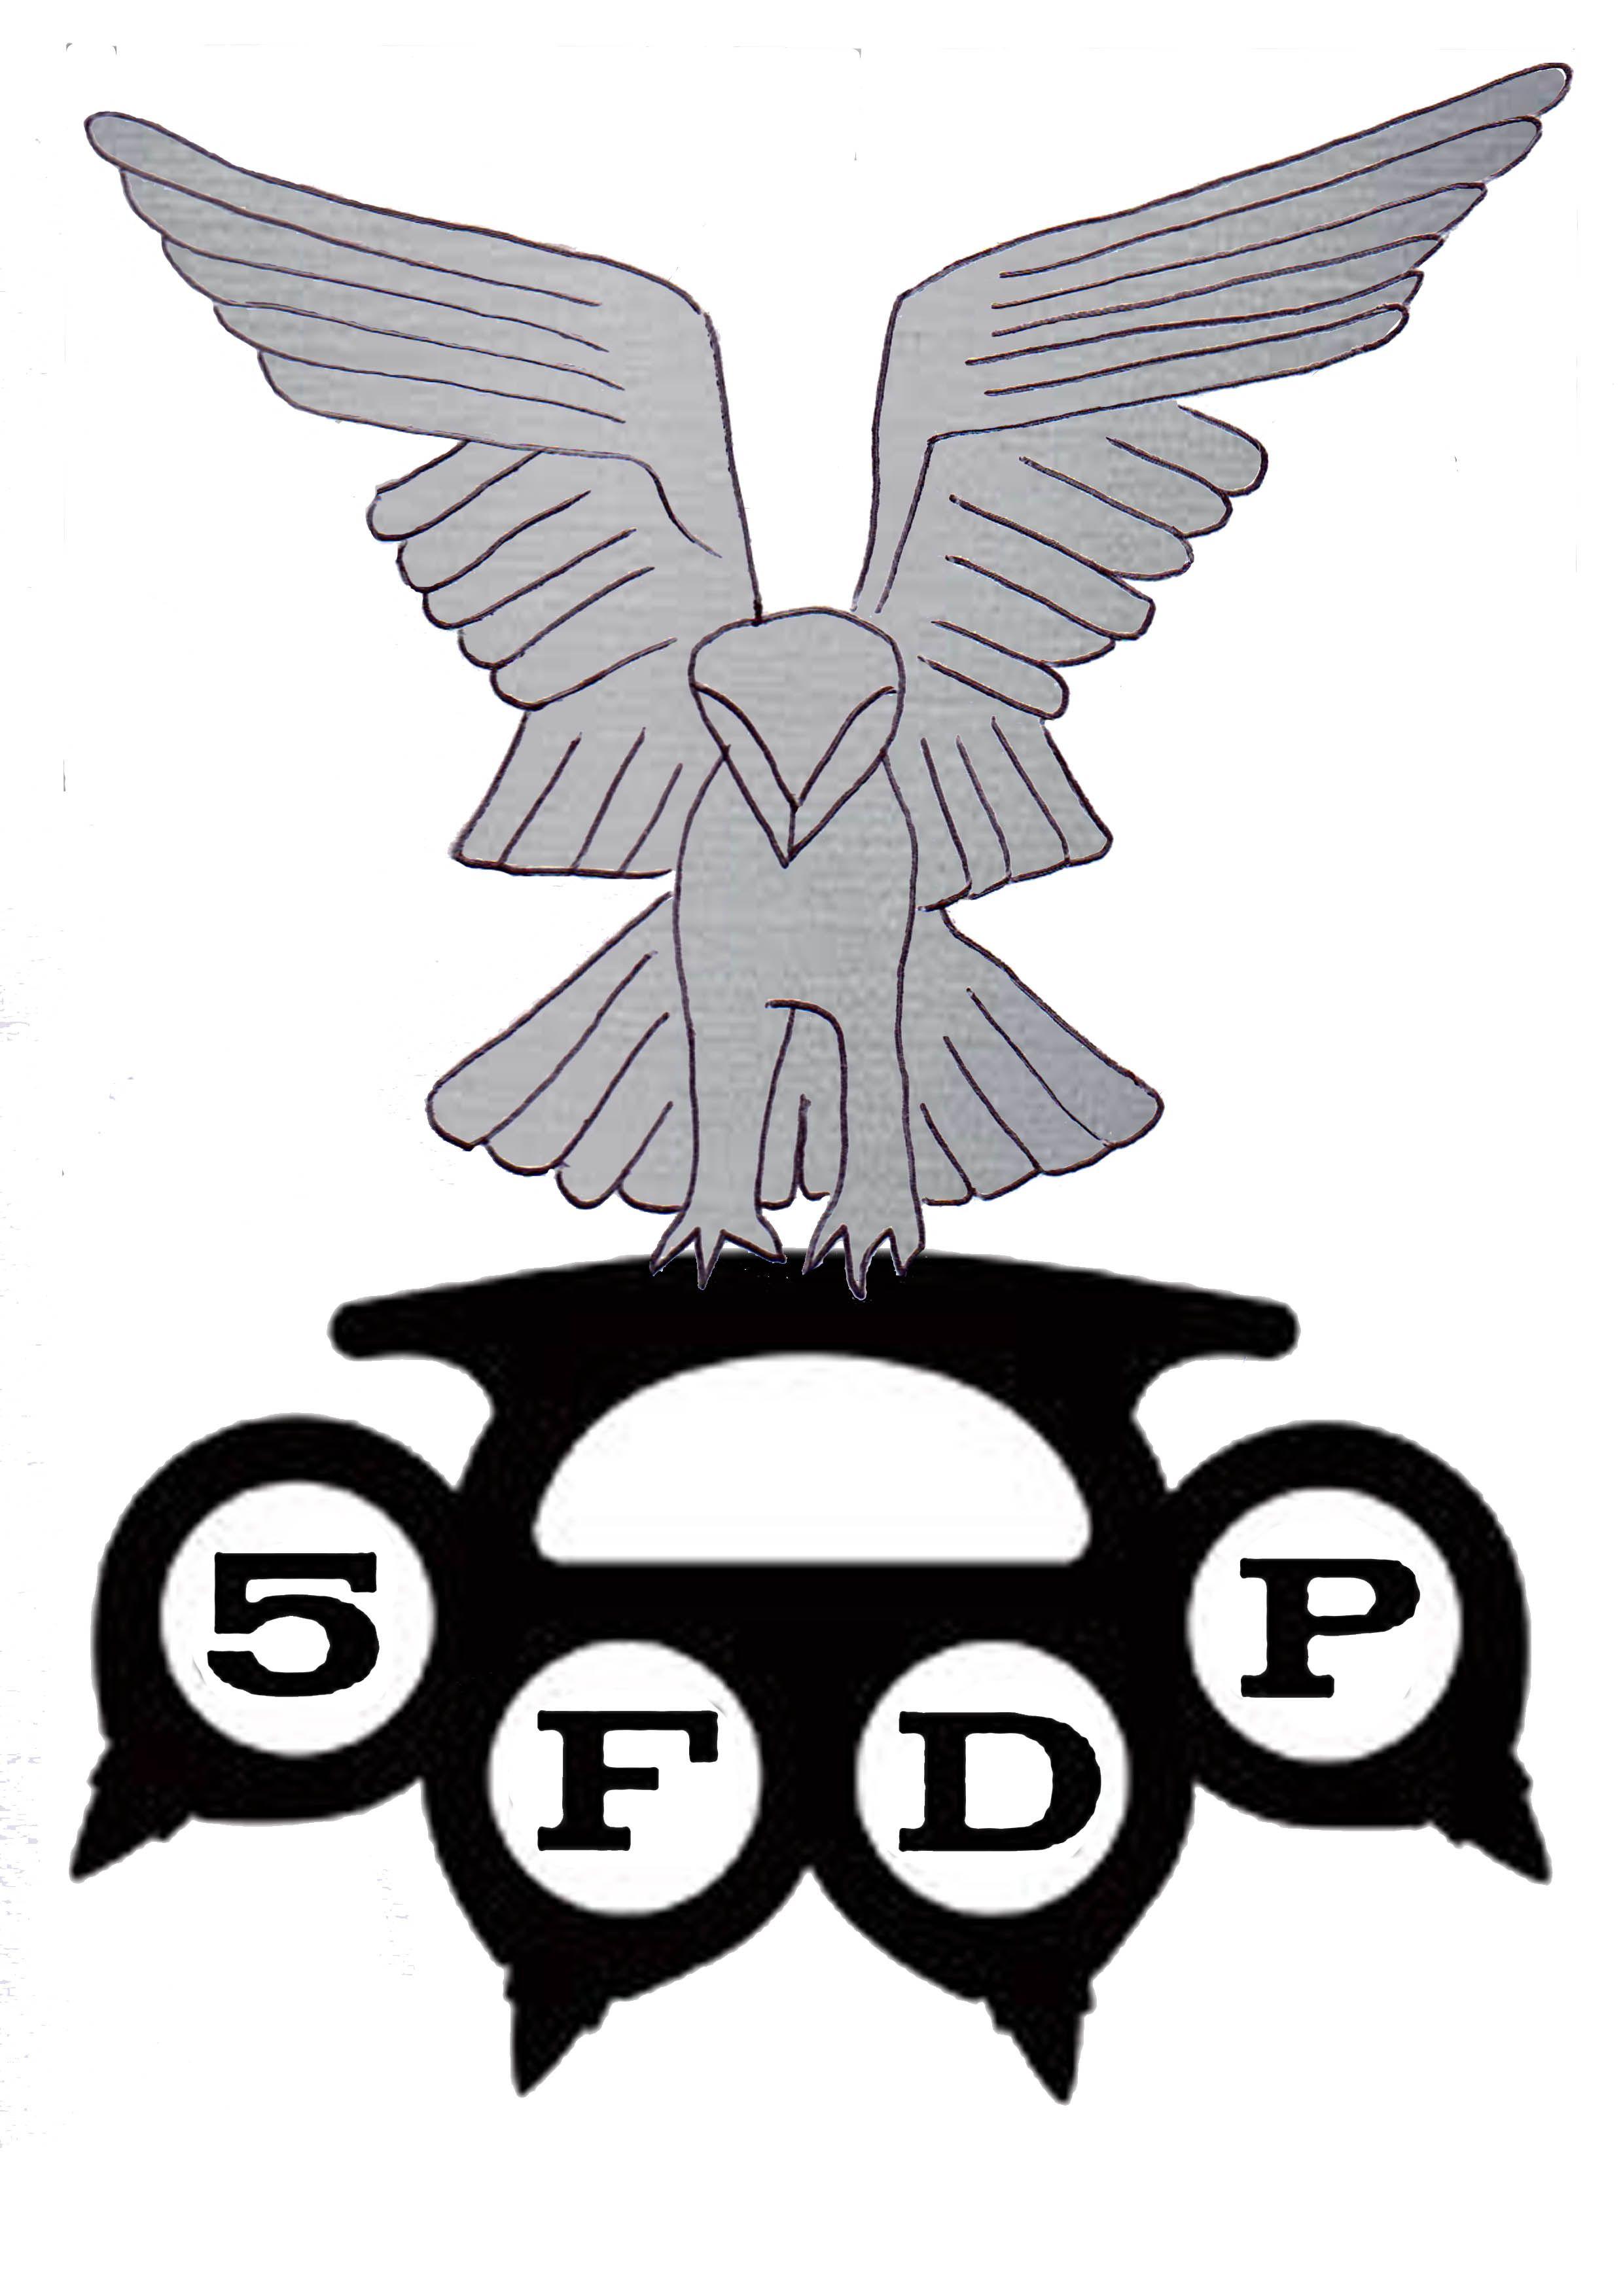 5FDP Eagle Logo - Competition Brief : Design a logo for the band Five Finger Death